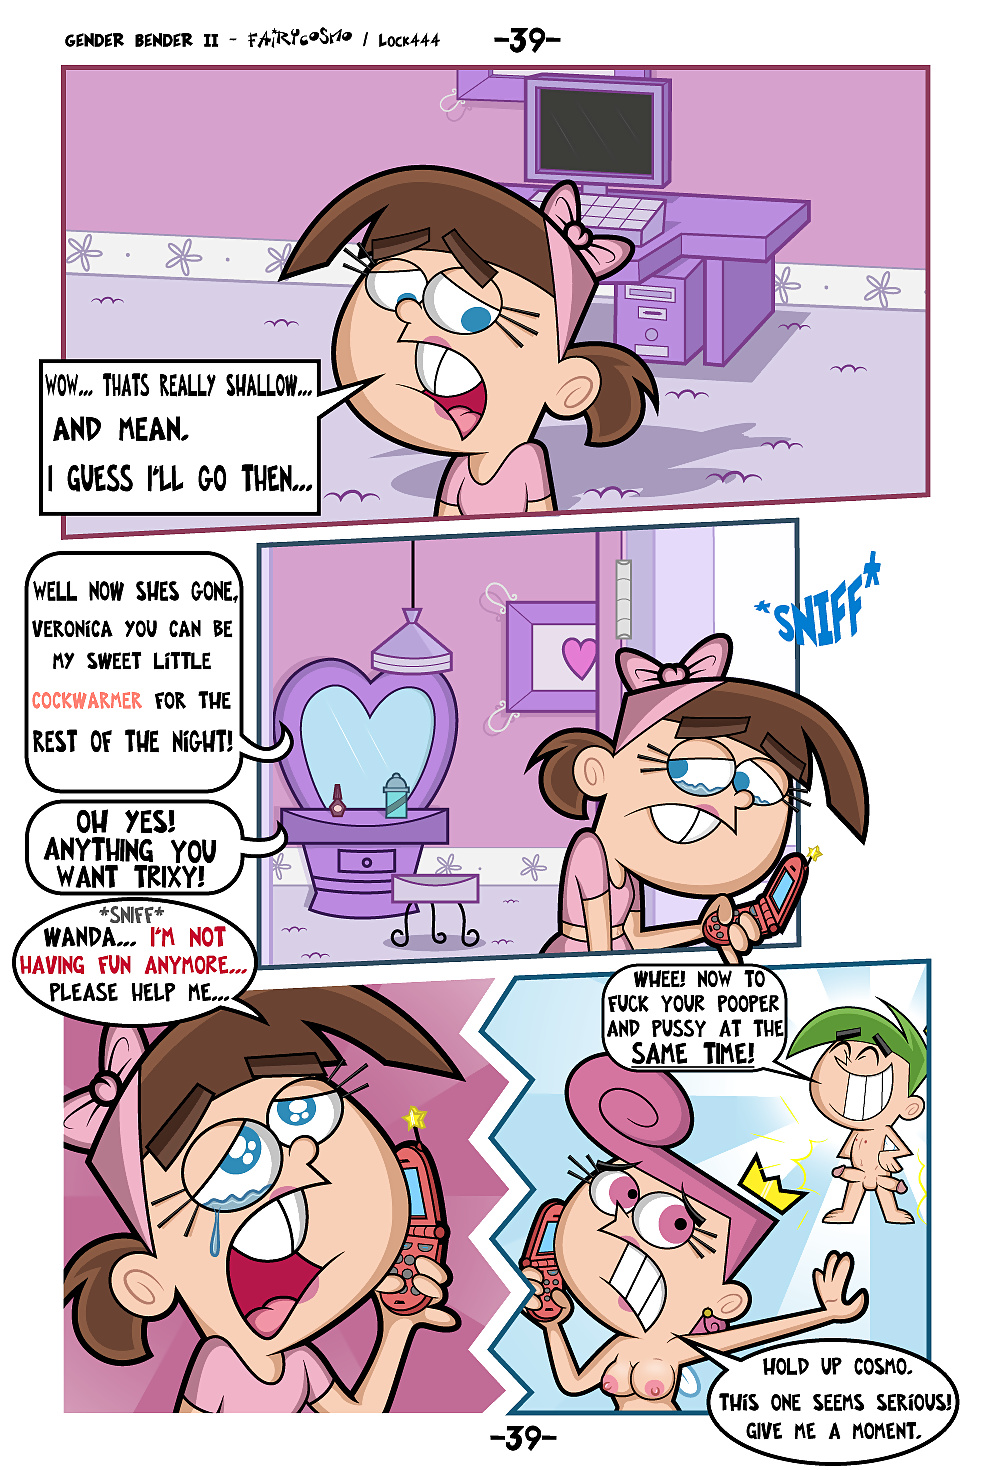 Fairly Oddparents #33464902